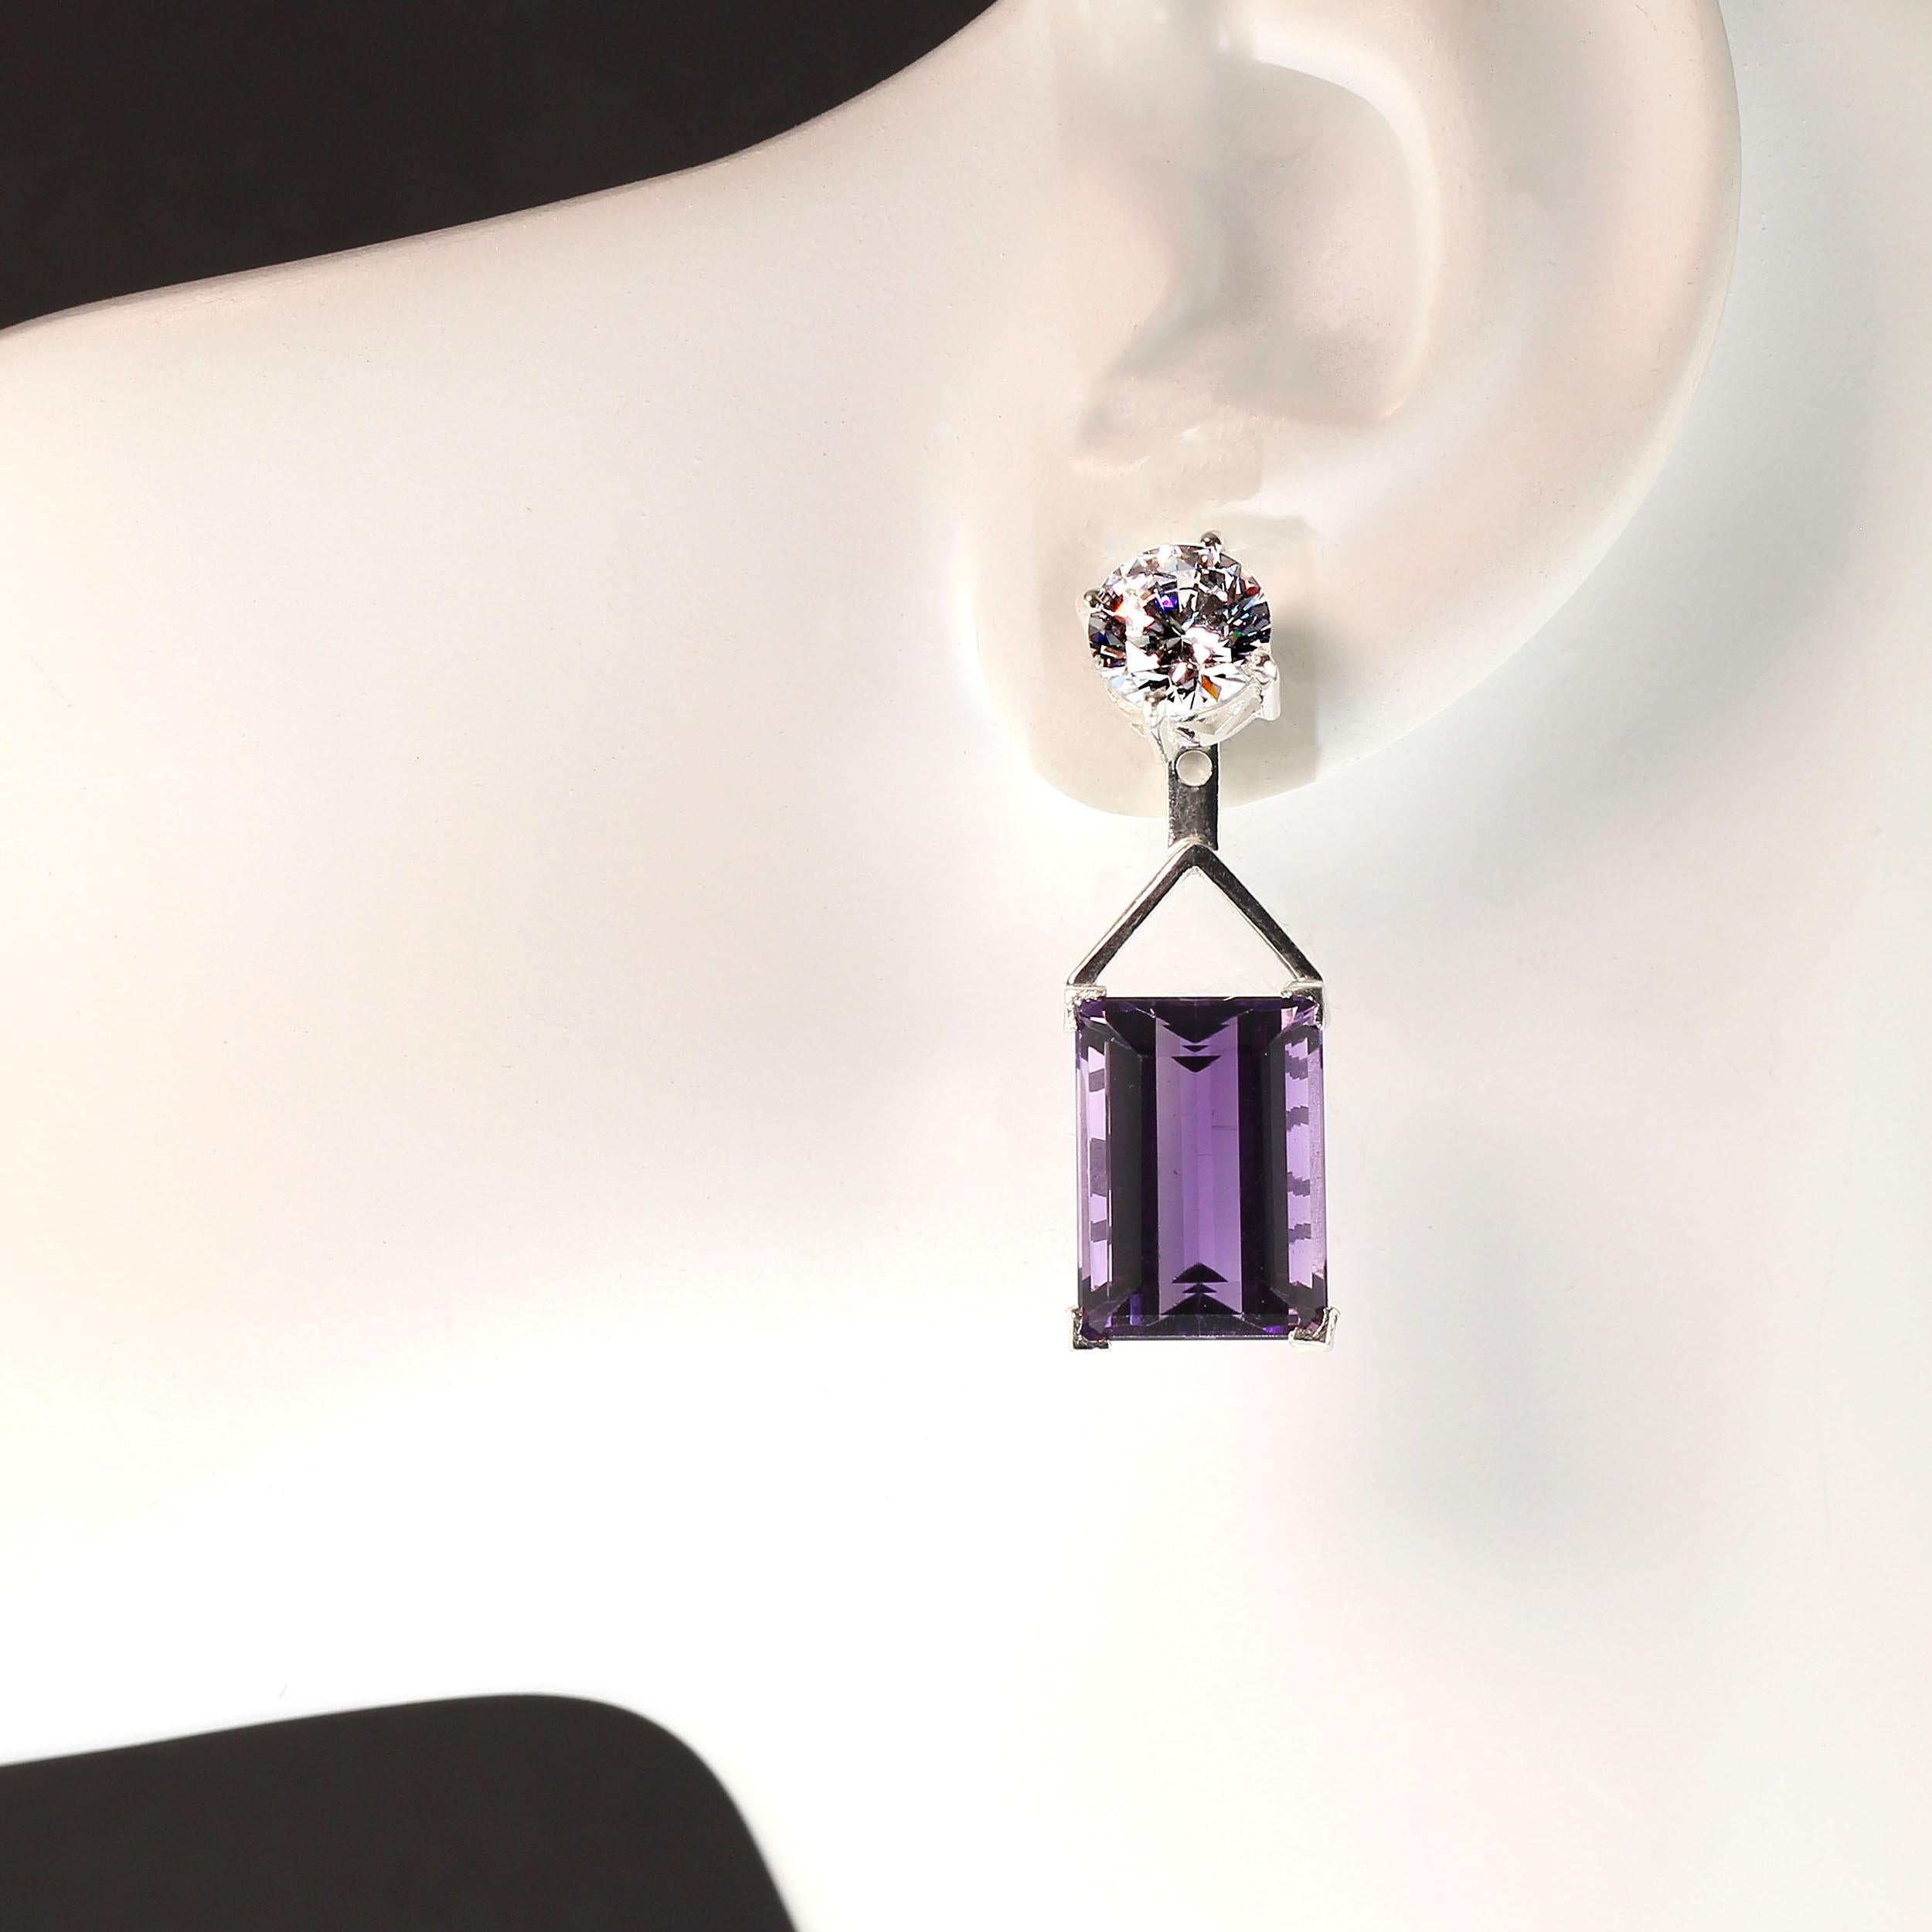 Versatile genuine scintillating Zircon and purple Amethyst earrings.  These earrings are elegant and fun.  Hang the beautifully cut purple Amethysts from the round Zircons for a lovely long (1.25 inch) earring. Wear the sparkling Zircons alone as a